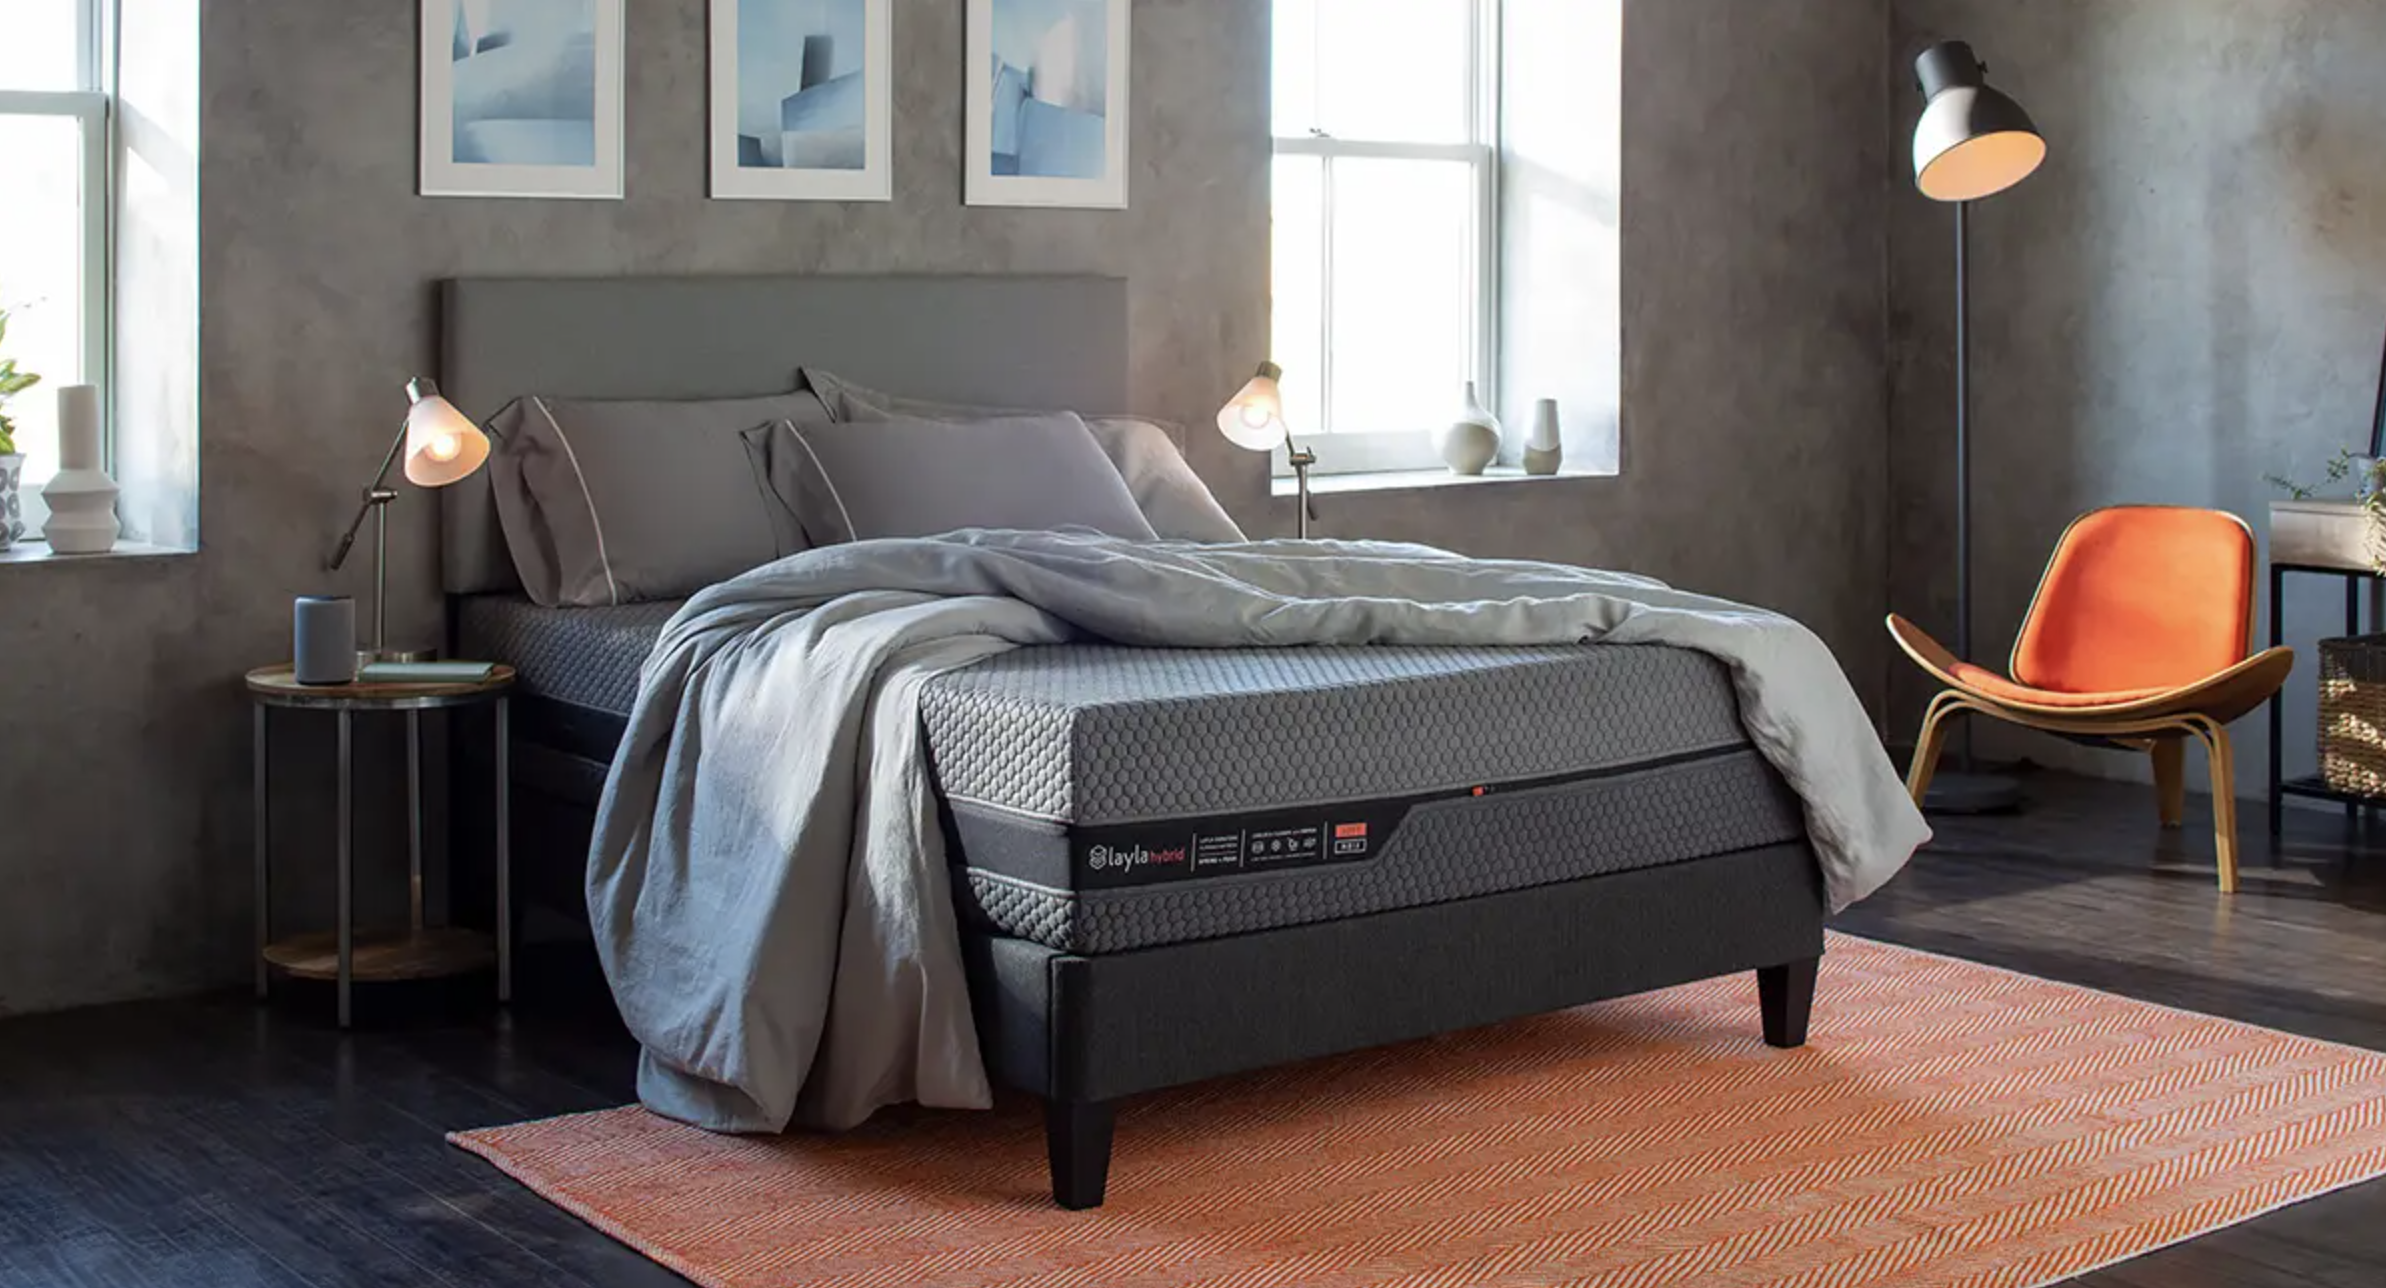 Trouble sleeping? Maybe it’s time for a new mattress — the Layla Hybrid is $200 off for a limited time.